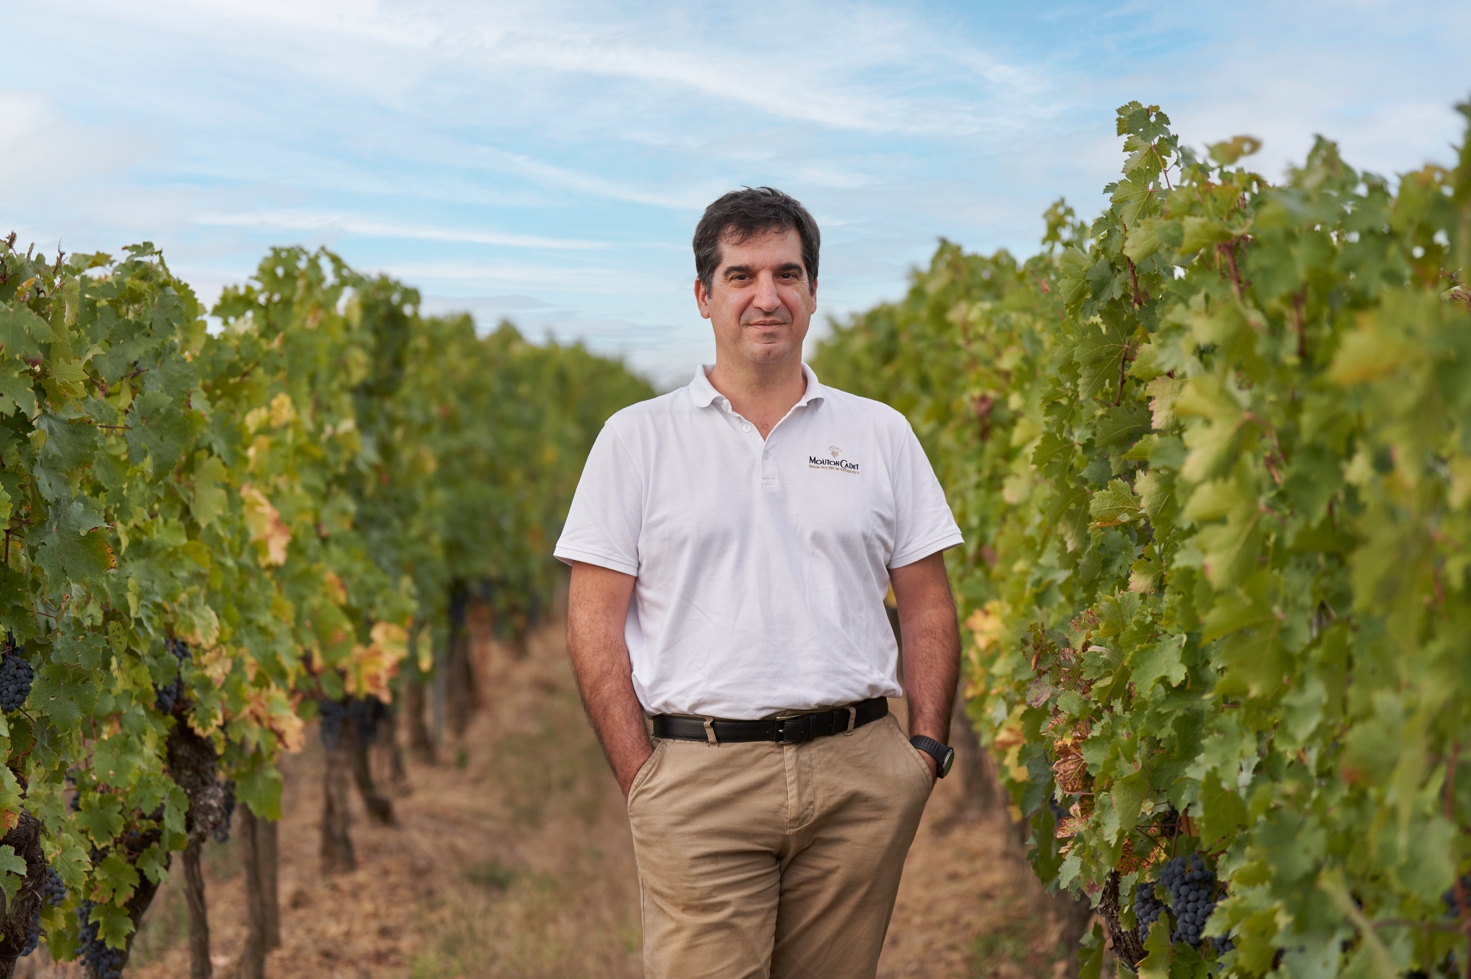 A Heritage Of Mouton Cadet Wines With Visionary Leadership